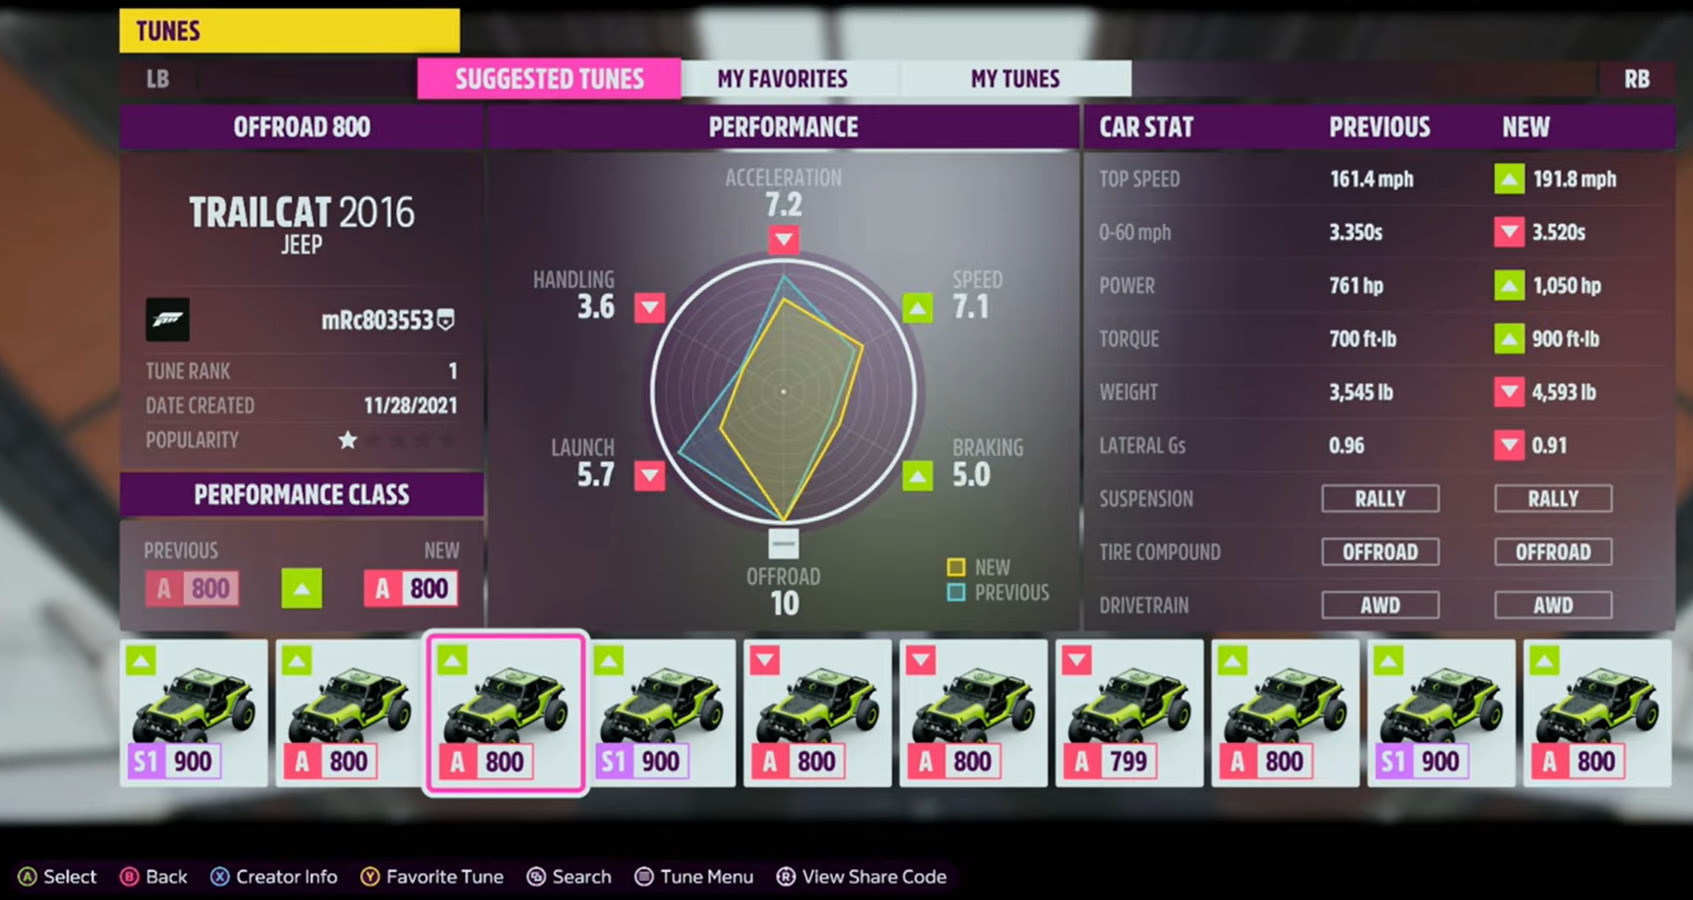 How to use share codes in Forza Horizon 5 - FELIXDICIT